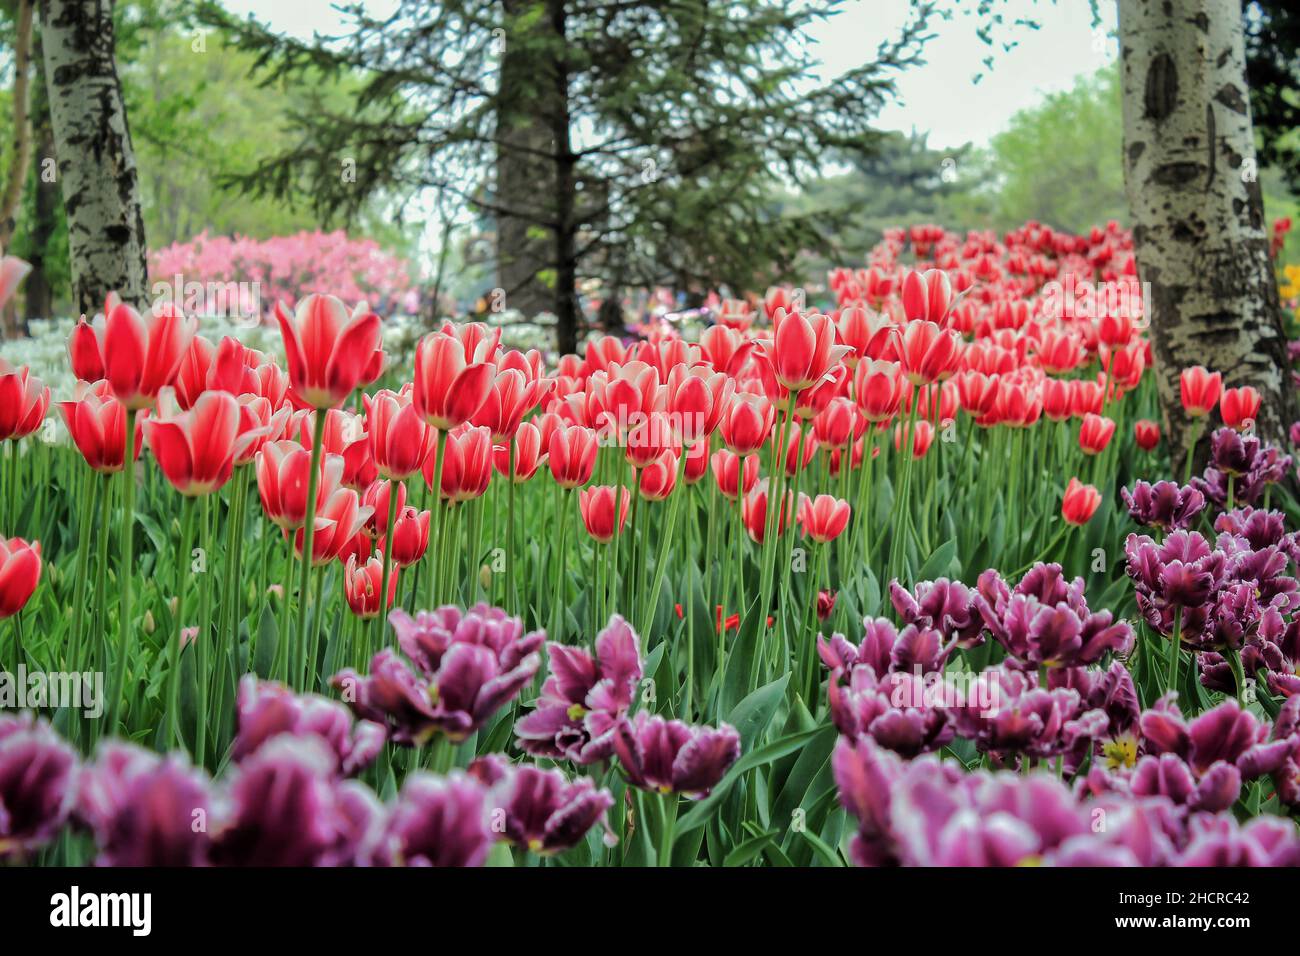 Scenic view of colorful tulips in the park on a blurred background Stock Photo